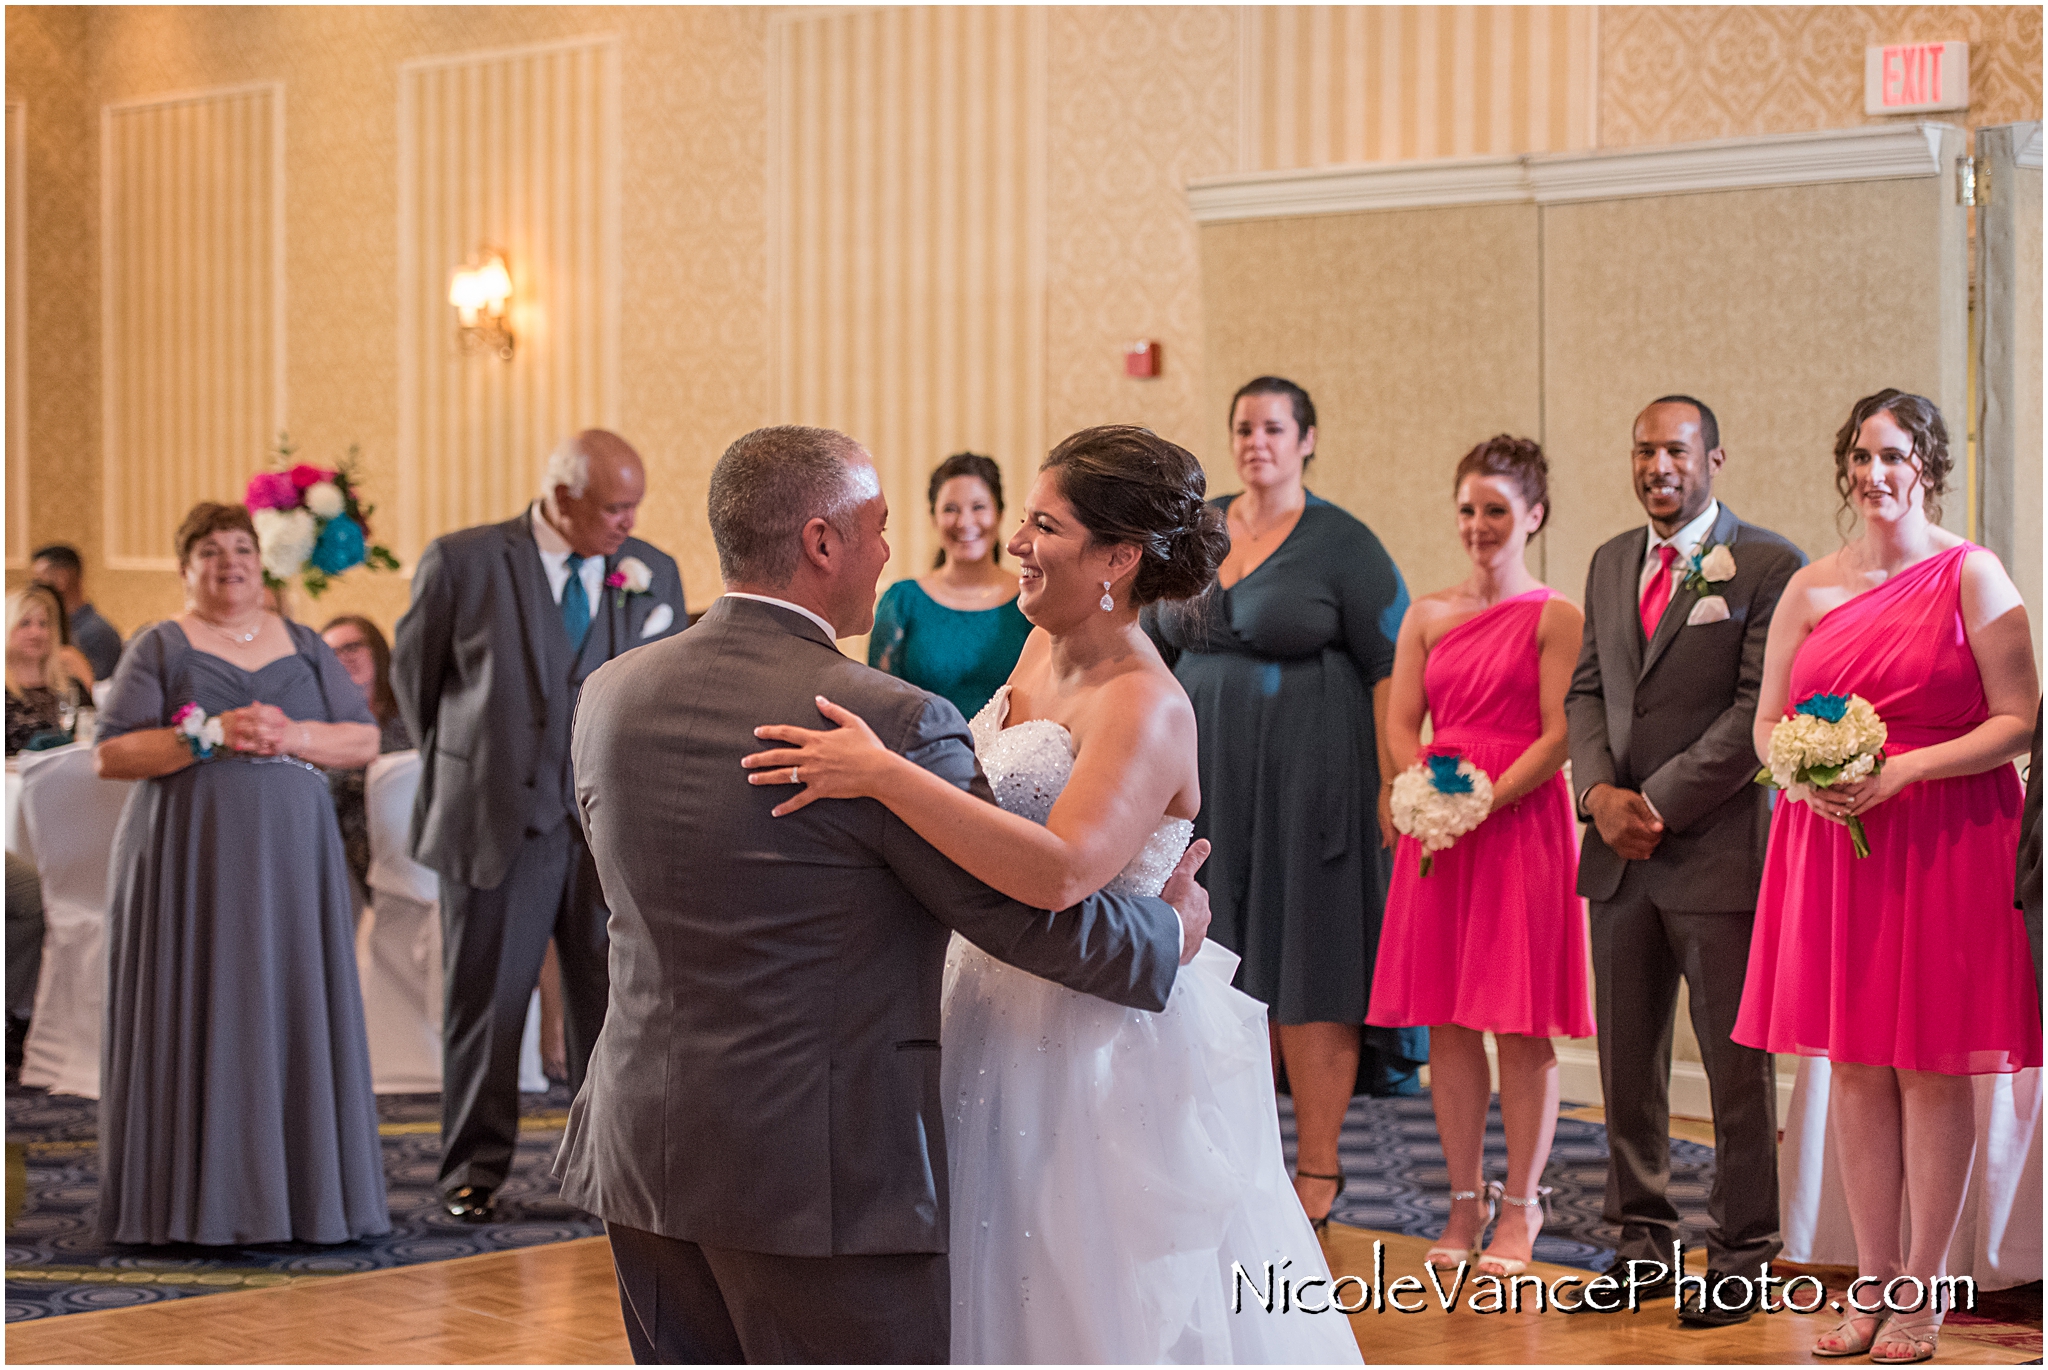 First Dance in the ballroom at Virginia Crossings.